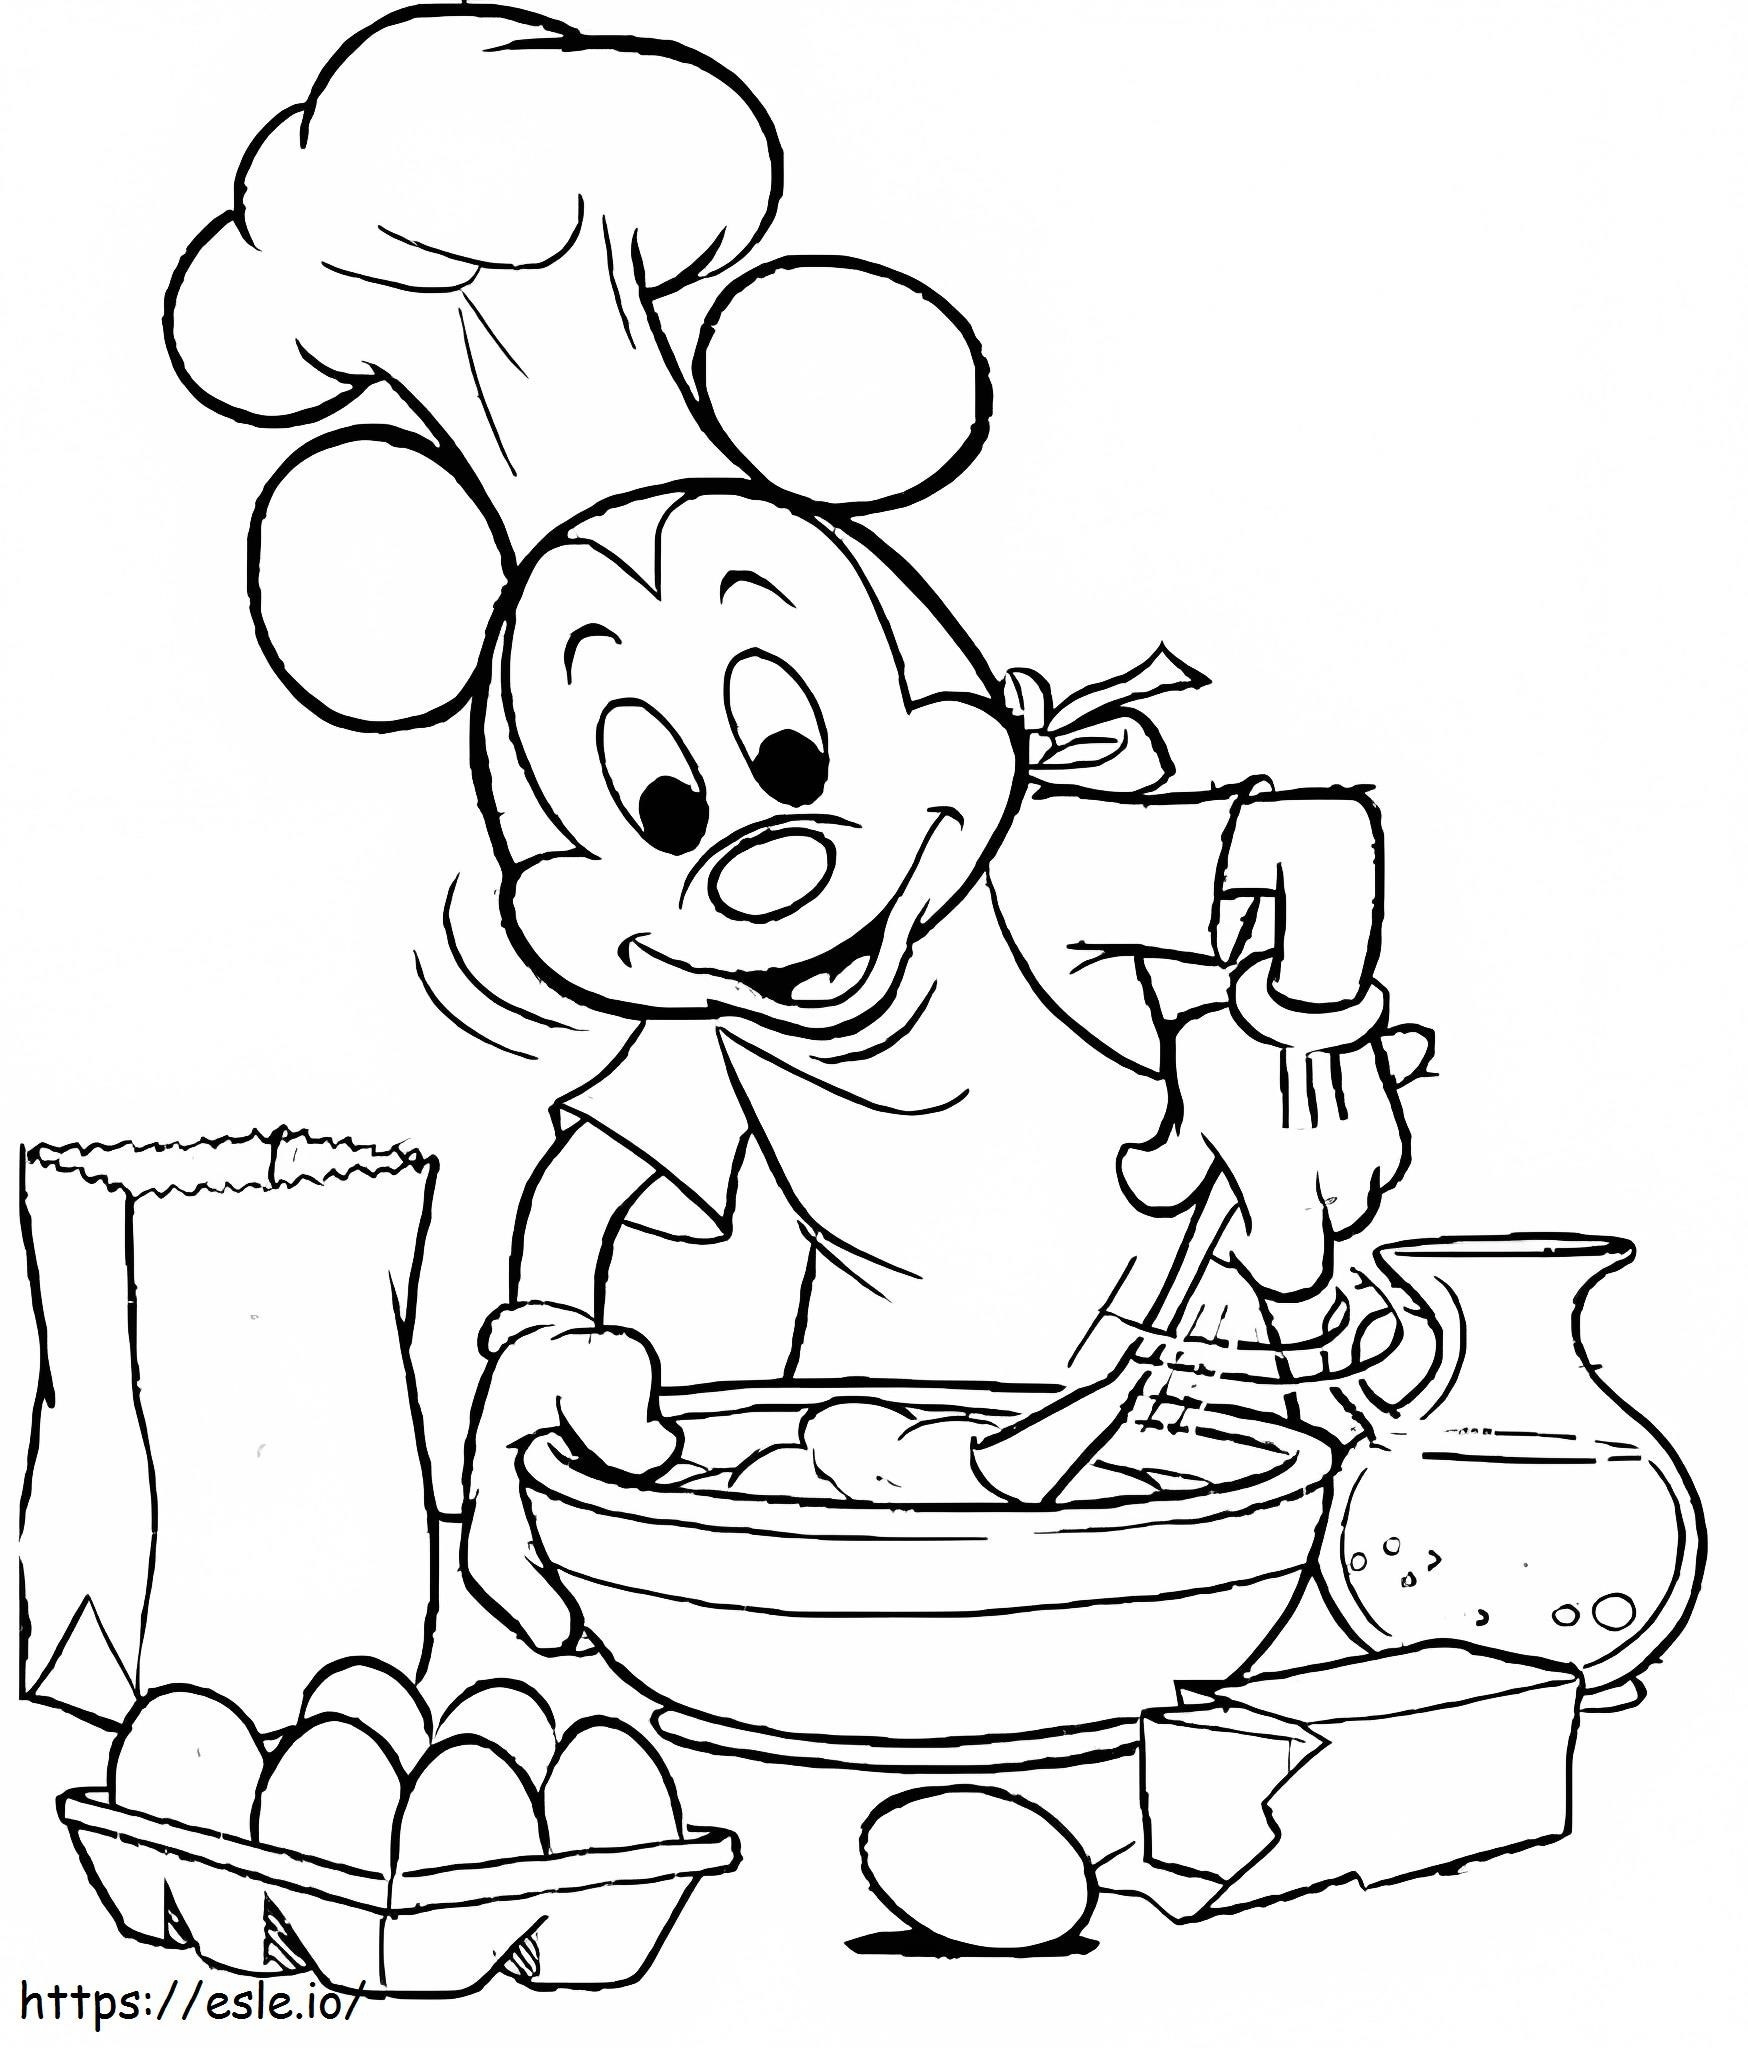 Cook Mikey Mouse coloring page